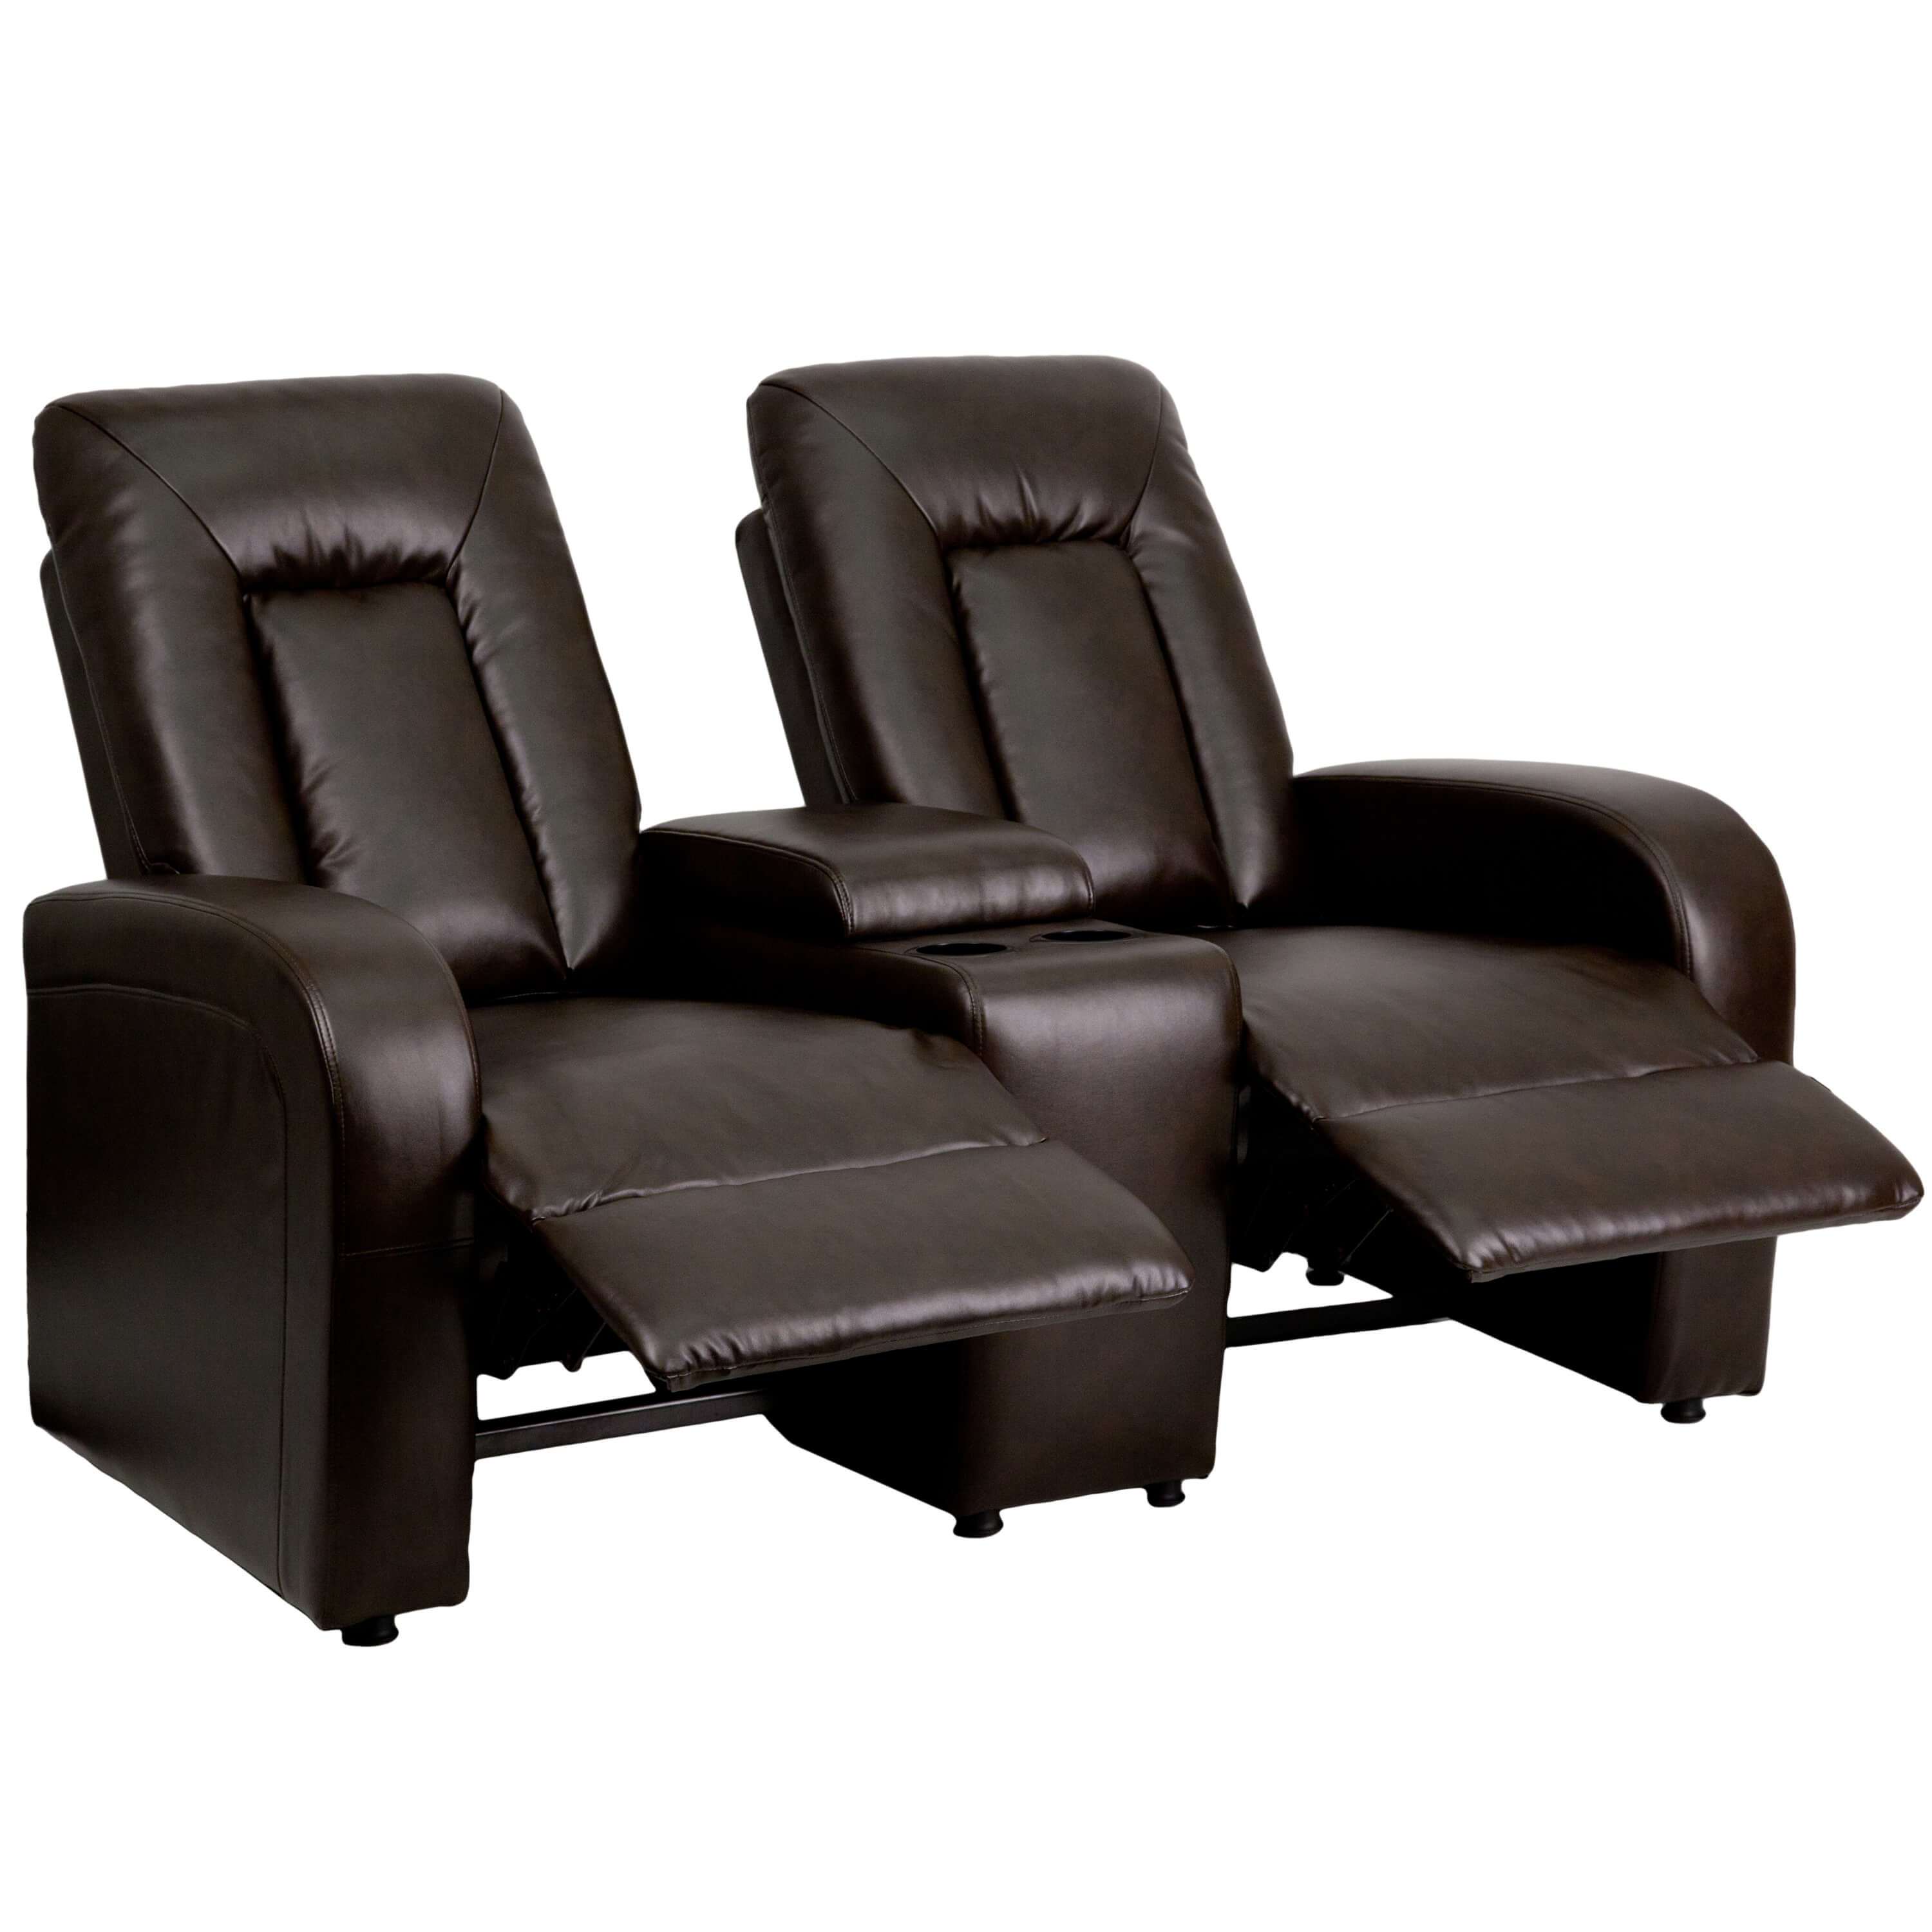 home-theatre-seating-movie-theater-couches.jpg